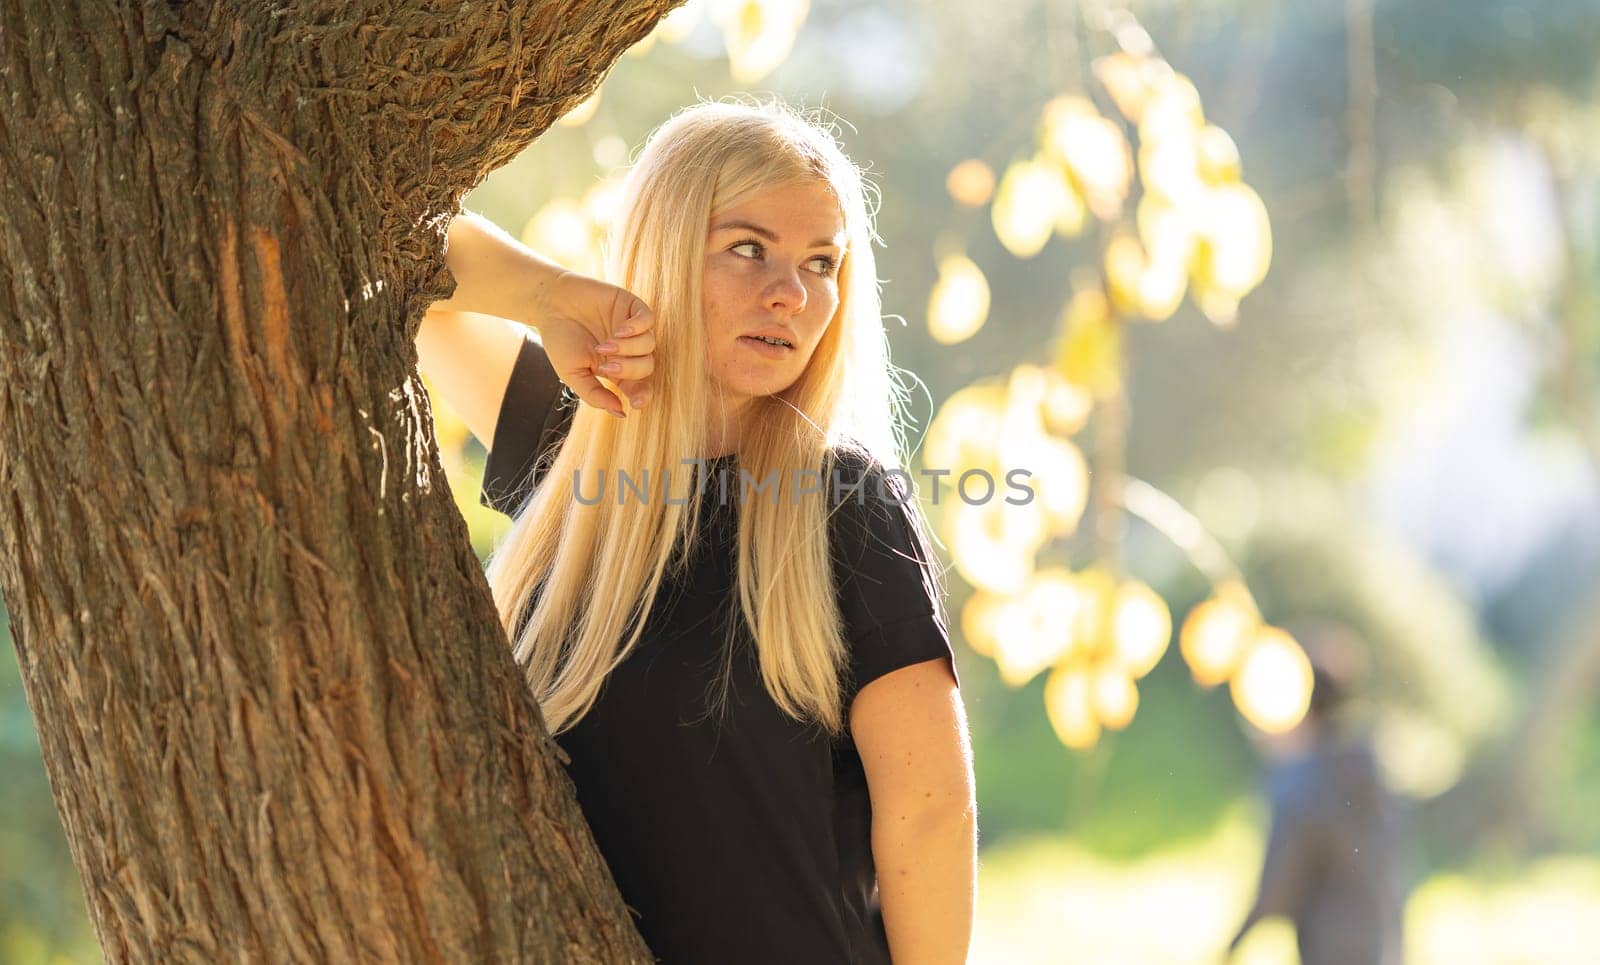 Smiling Woman with dentistry braces Leaning Against Tree in Park by Studia72